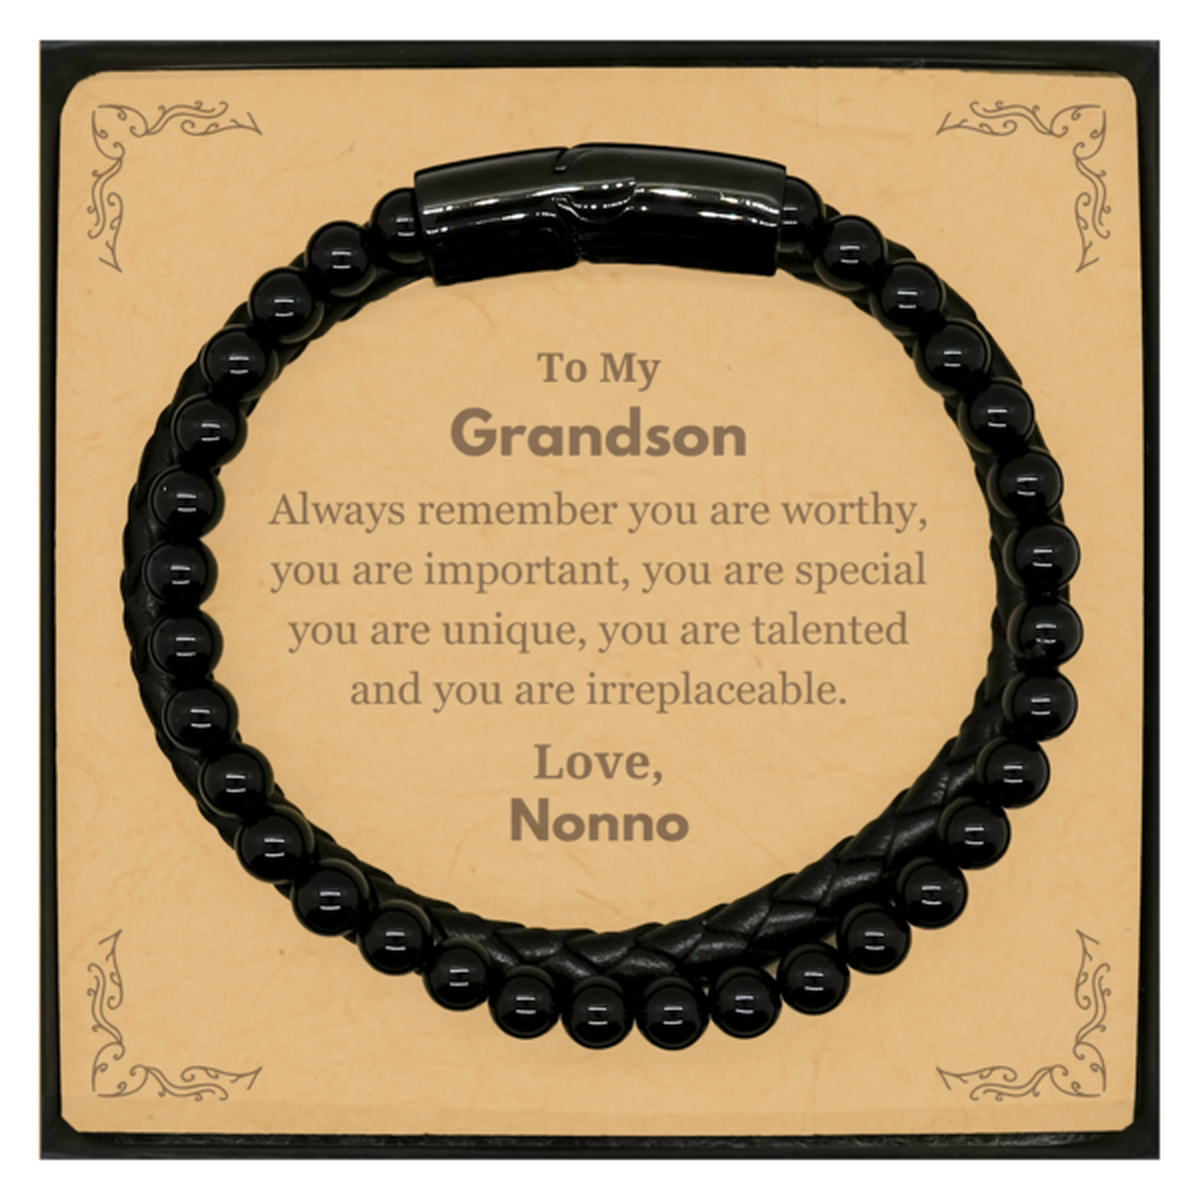 Grandson Birthday Gifts from Nonno, Inspirational Stone Leather Bracelets for Grandson Christmas Graduation Gifts for Grandson Always remember you are worthy, you are important. Love, Nonno